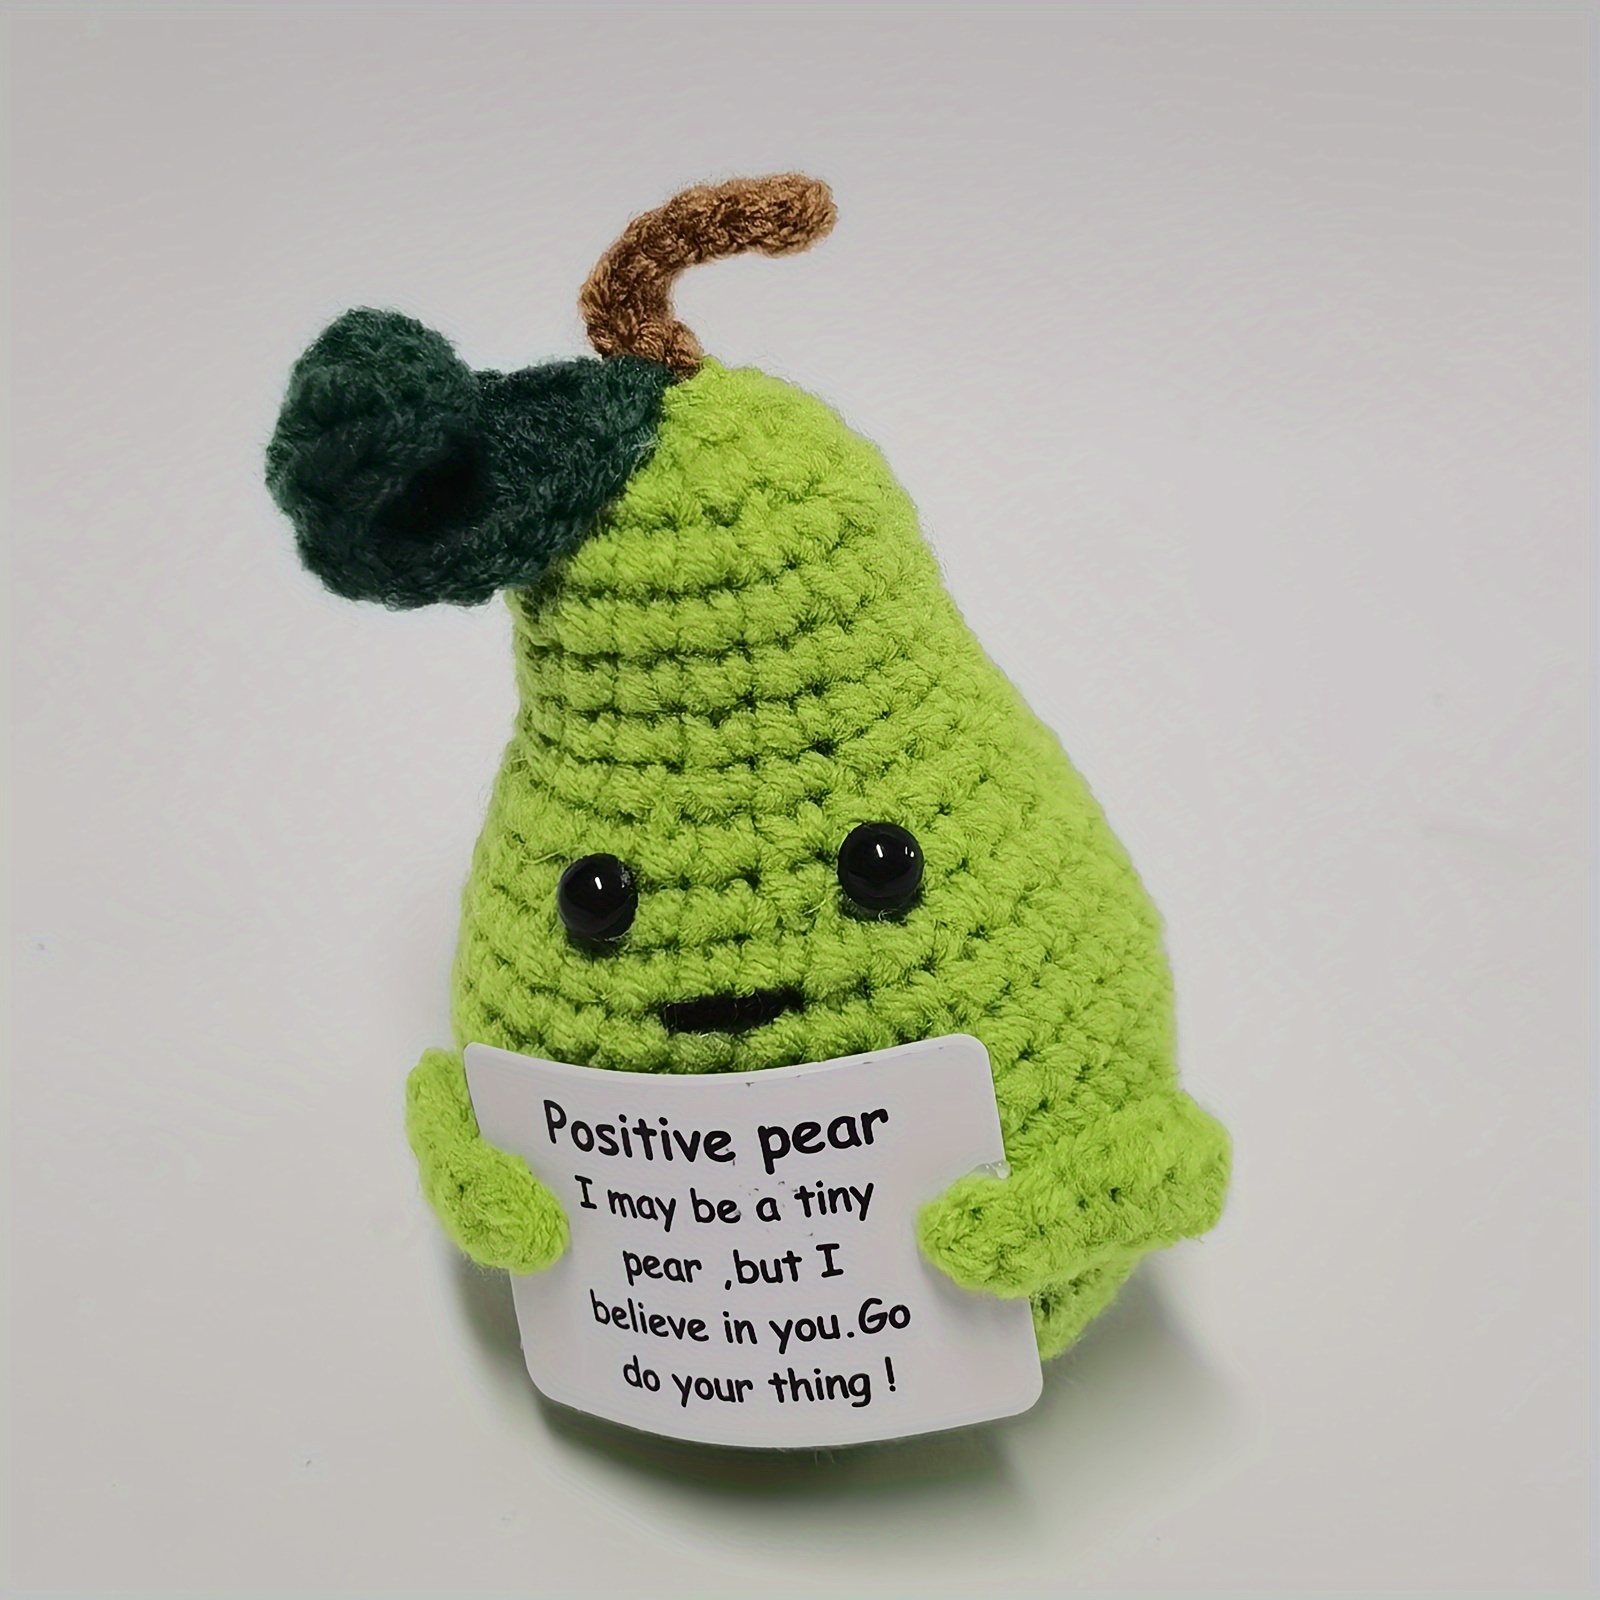 1pc Handmade Emotional Support Pickle Gift, Cucumber Knitting Doll  Emotional Encouragement Gifts With Wooden Base Cute Knitted Cucumber Reduce  Pressur